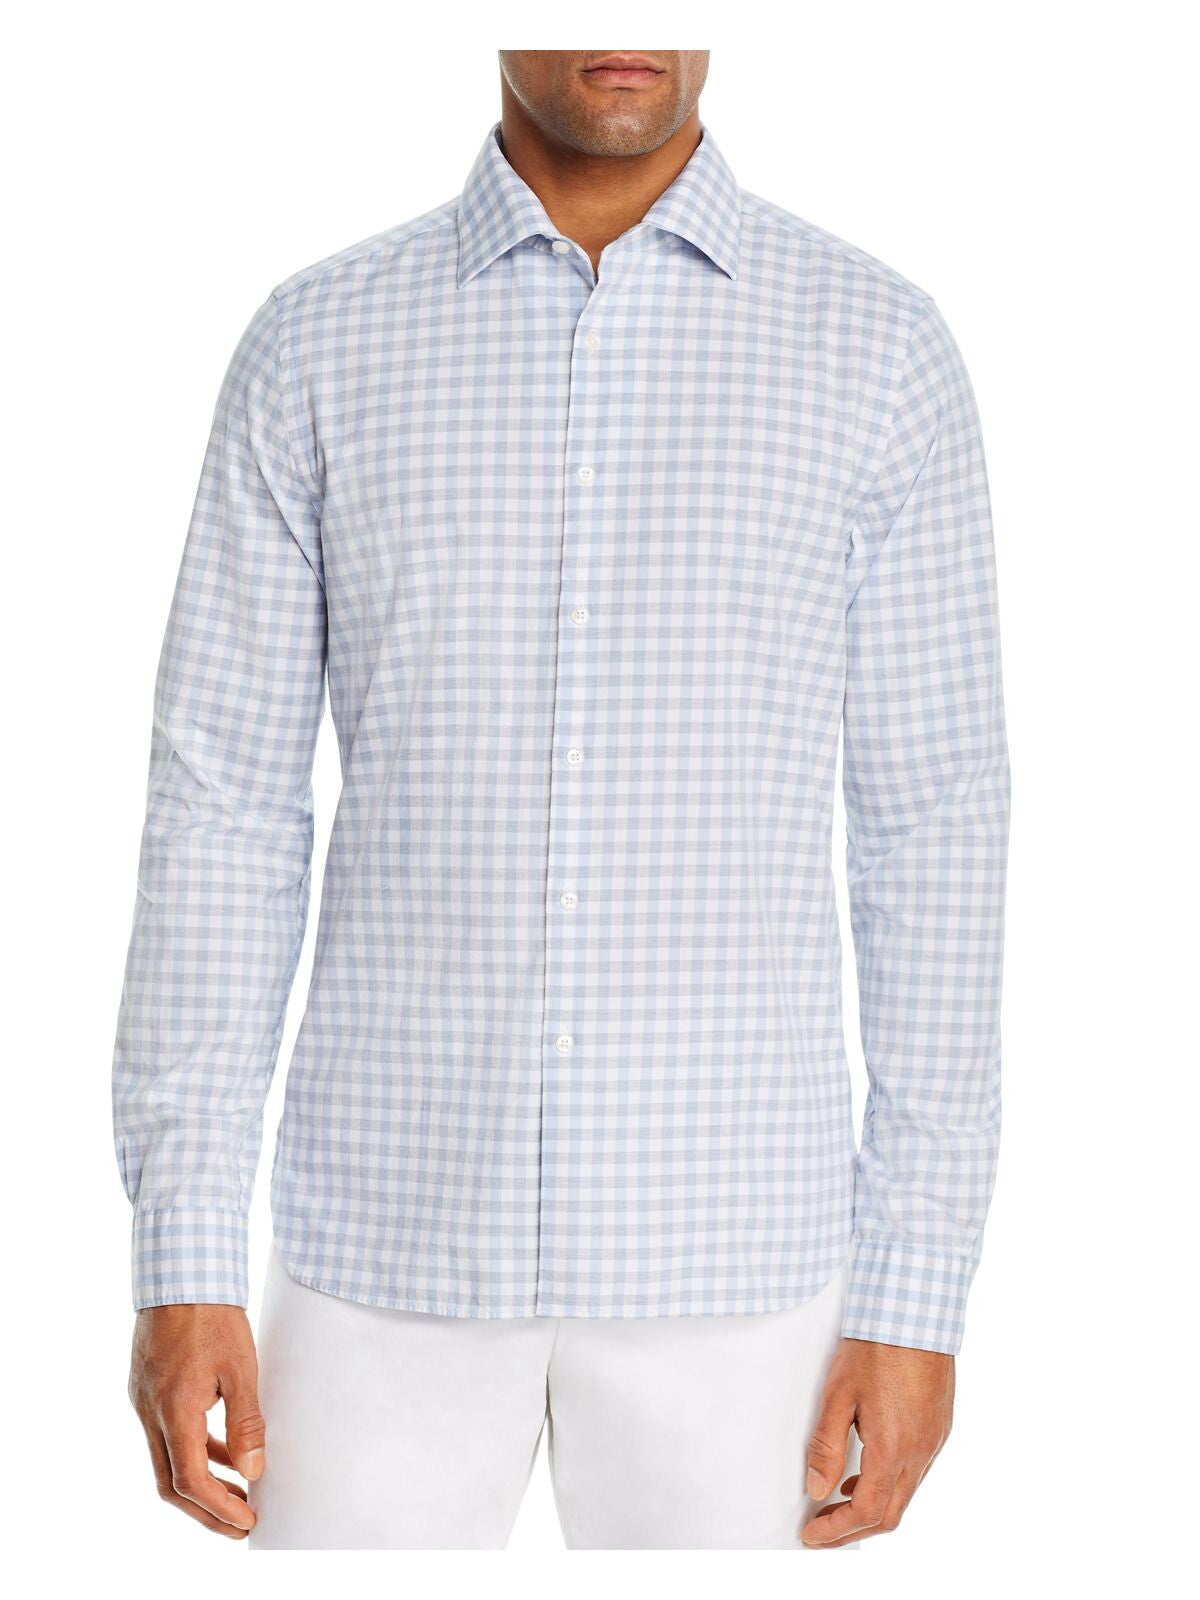 The Mens store Mens Light Blue Gingham Long Sleeve Classic Fit Button Down Casual Shirt L